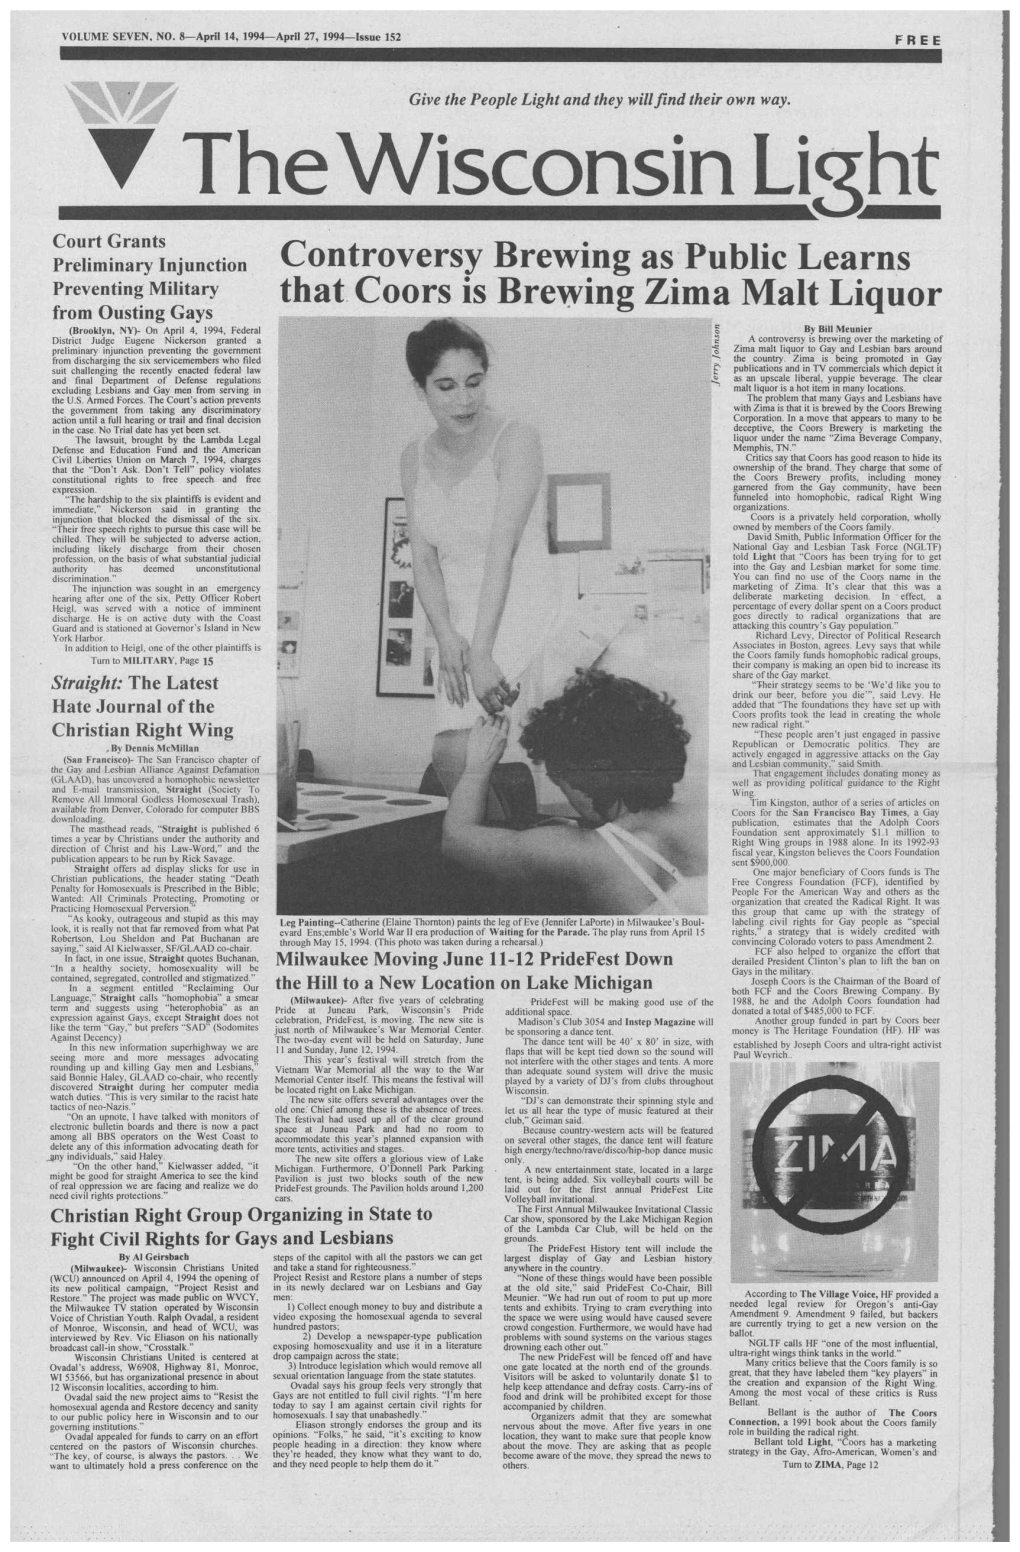 Controversy Brewing As Public Learns That. Coors Is Brewing Zima Malt